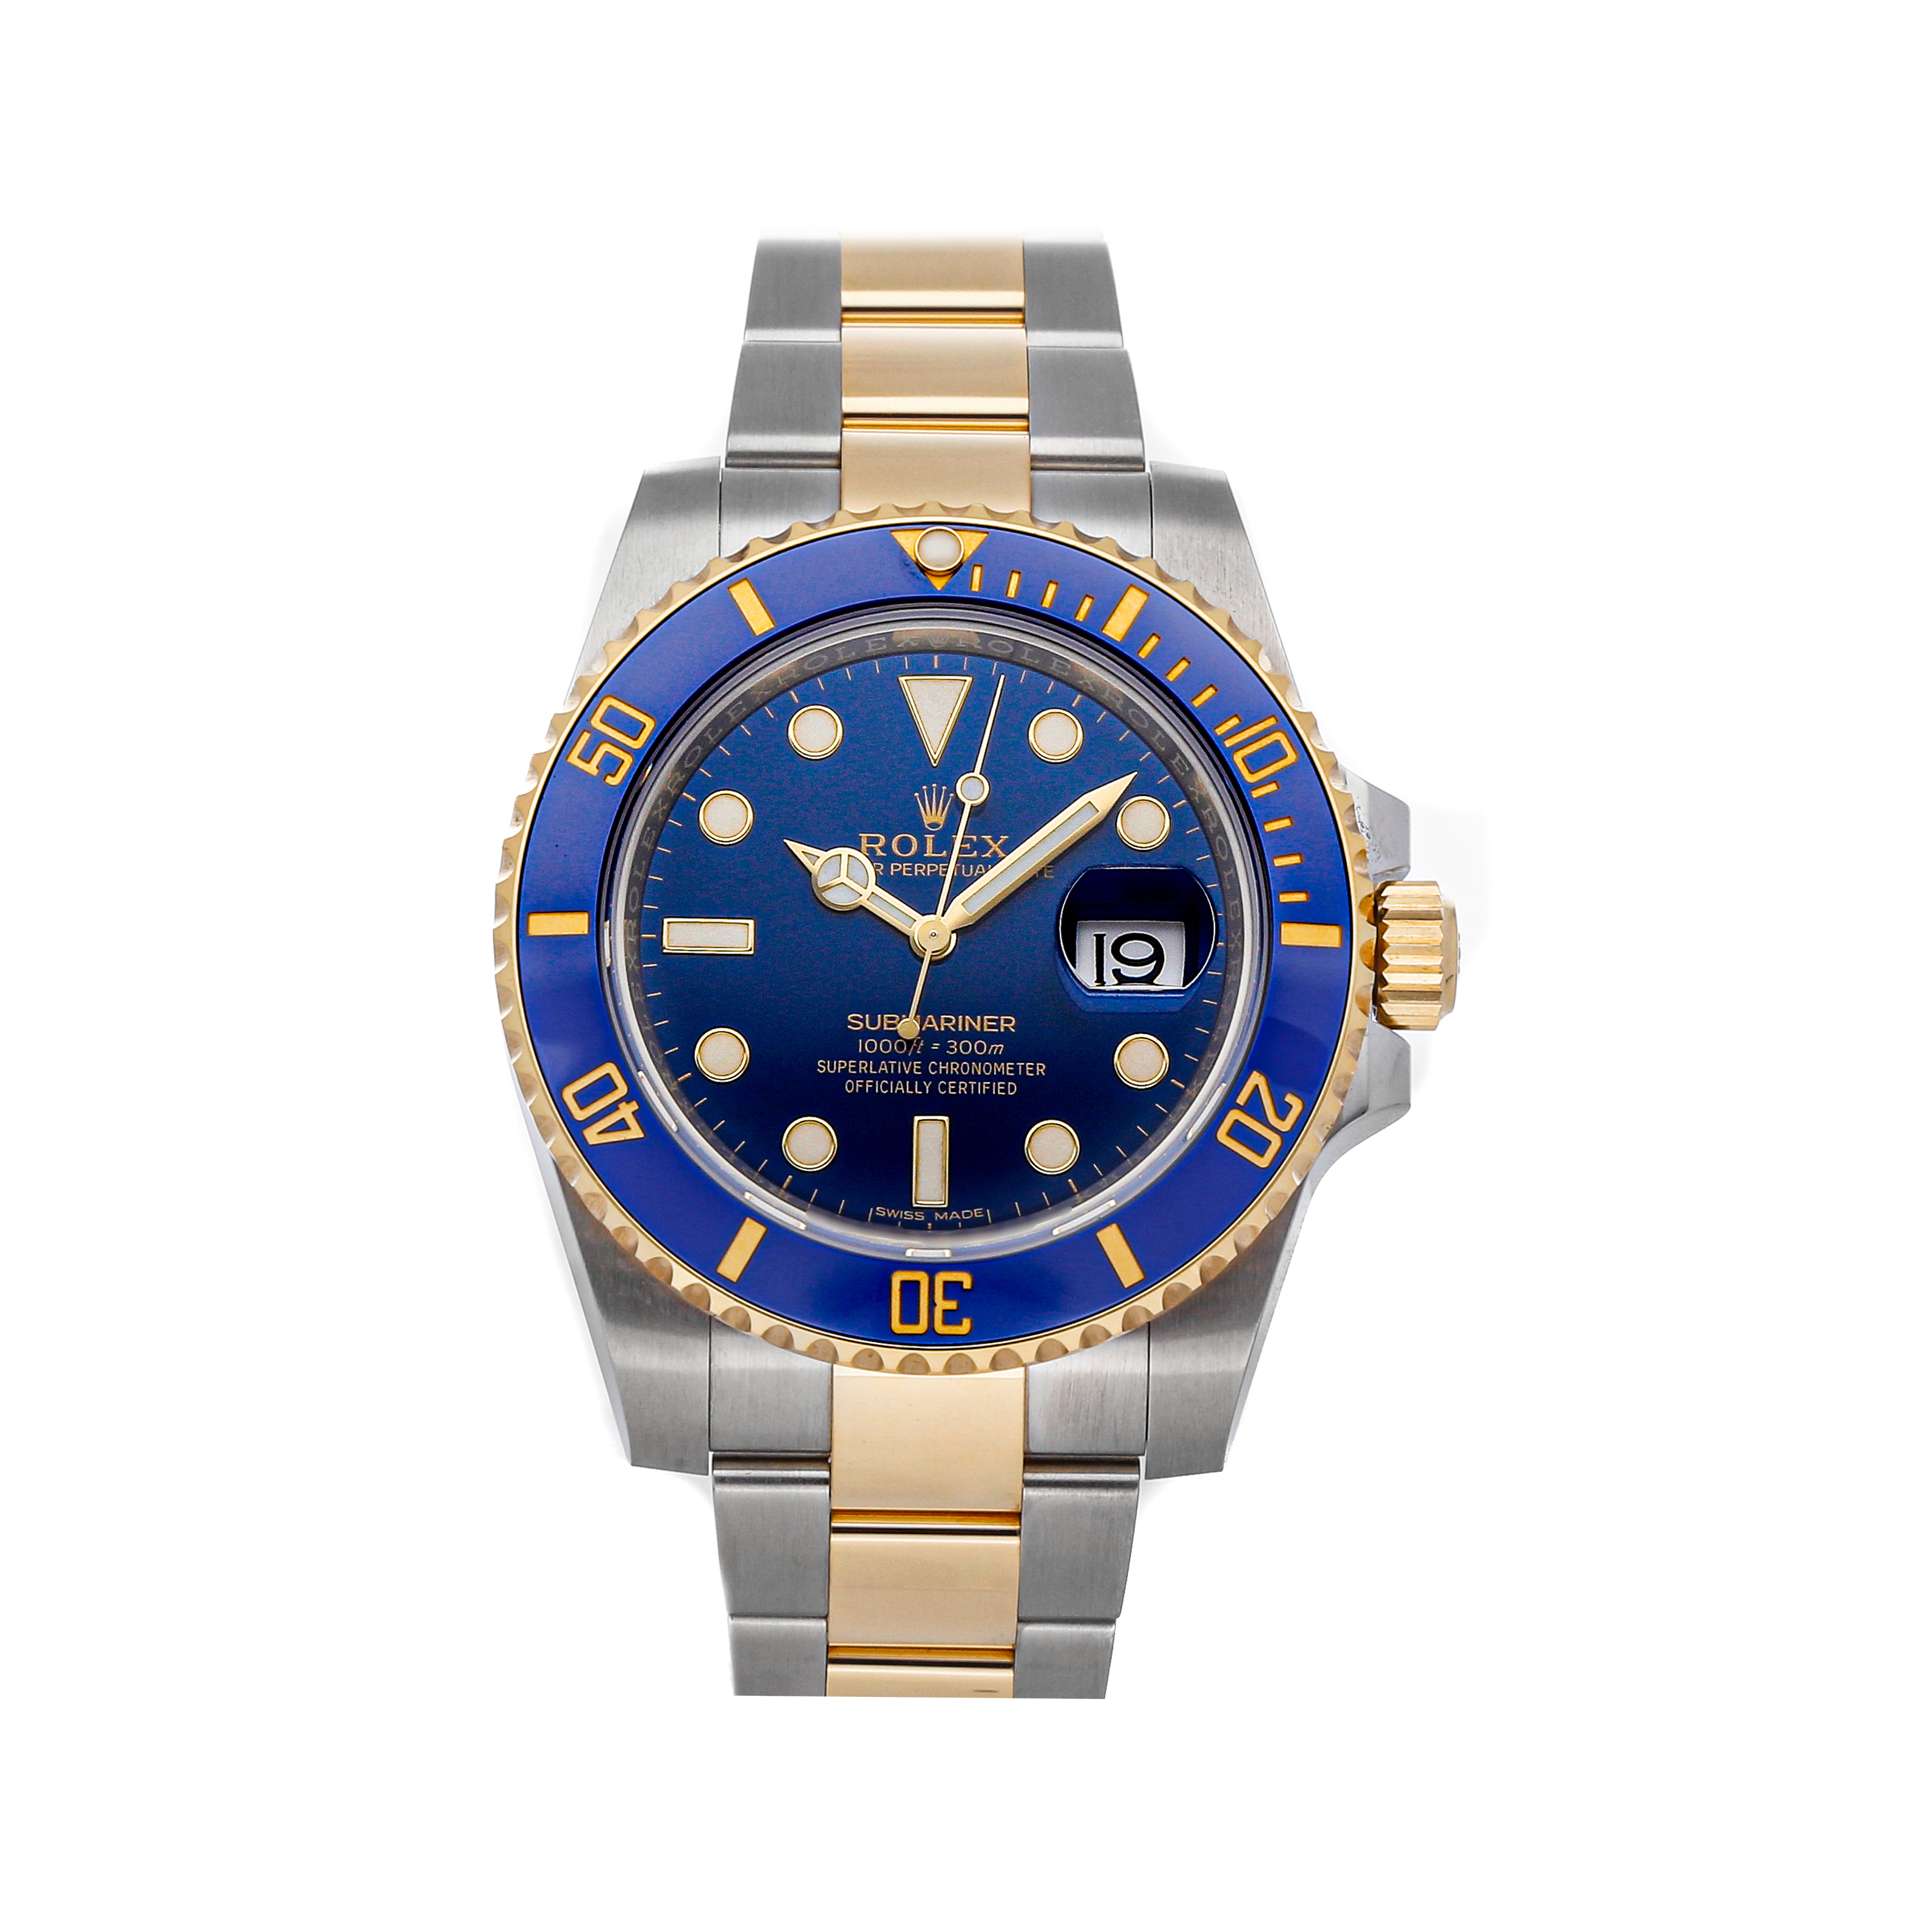 Certified Pre-Owned Rolex Watches for 